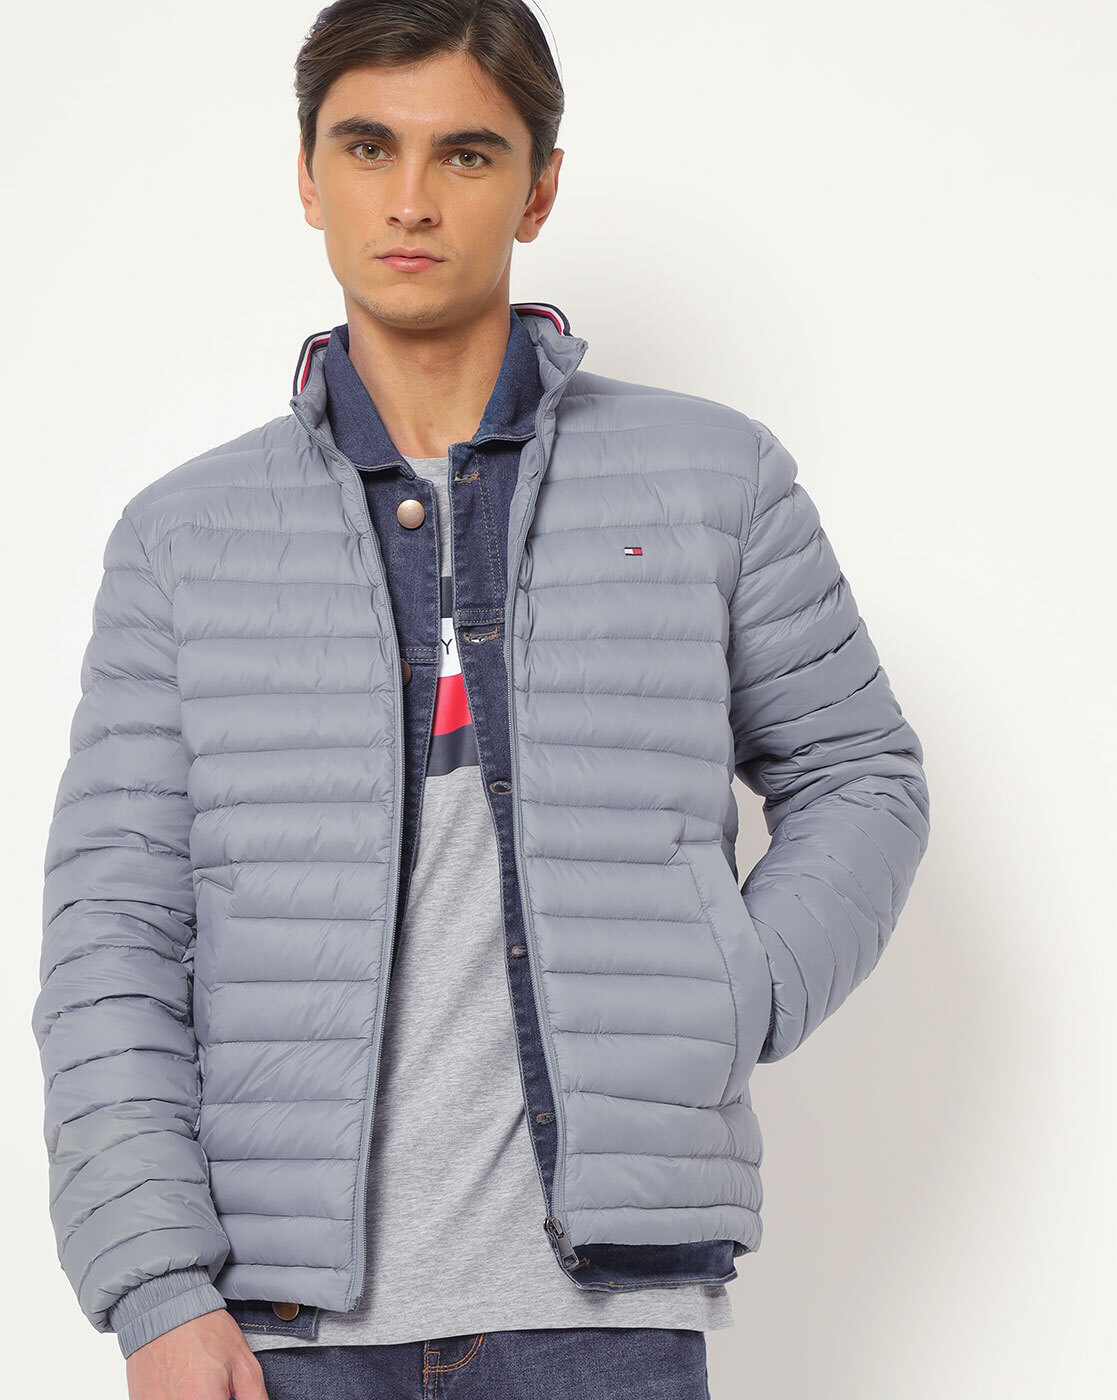 Buy Grey Jackets & Coats for Men by Barstow Online | Ajio.com